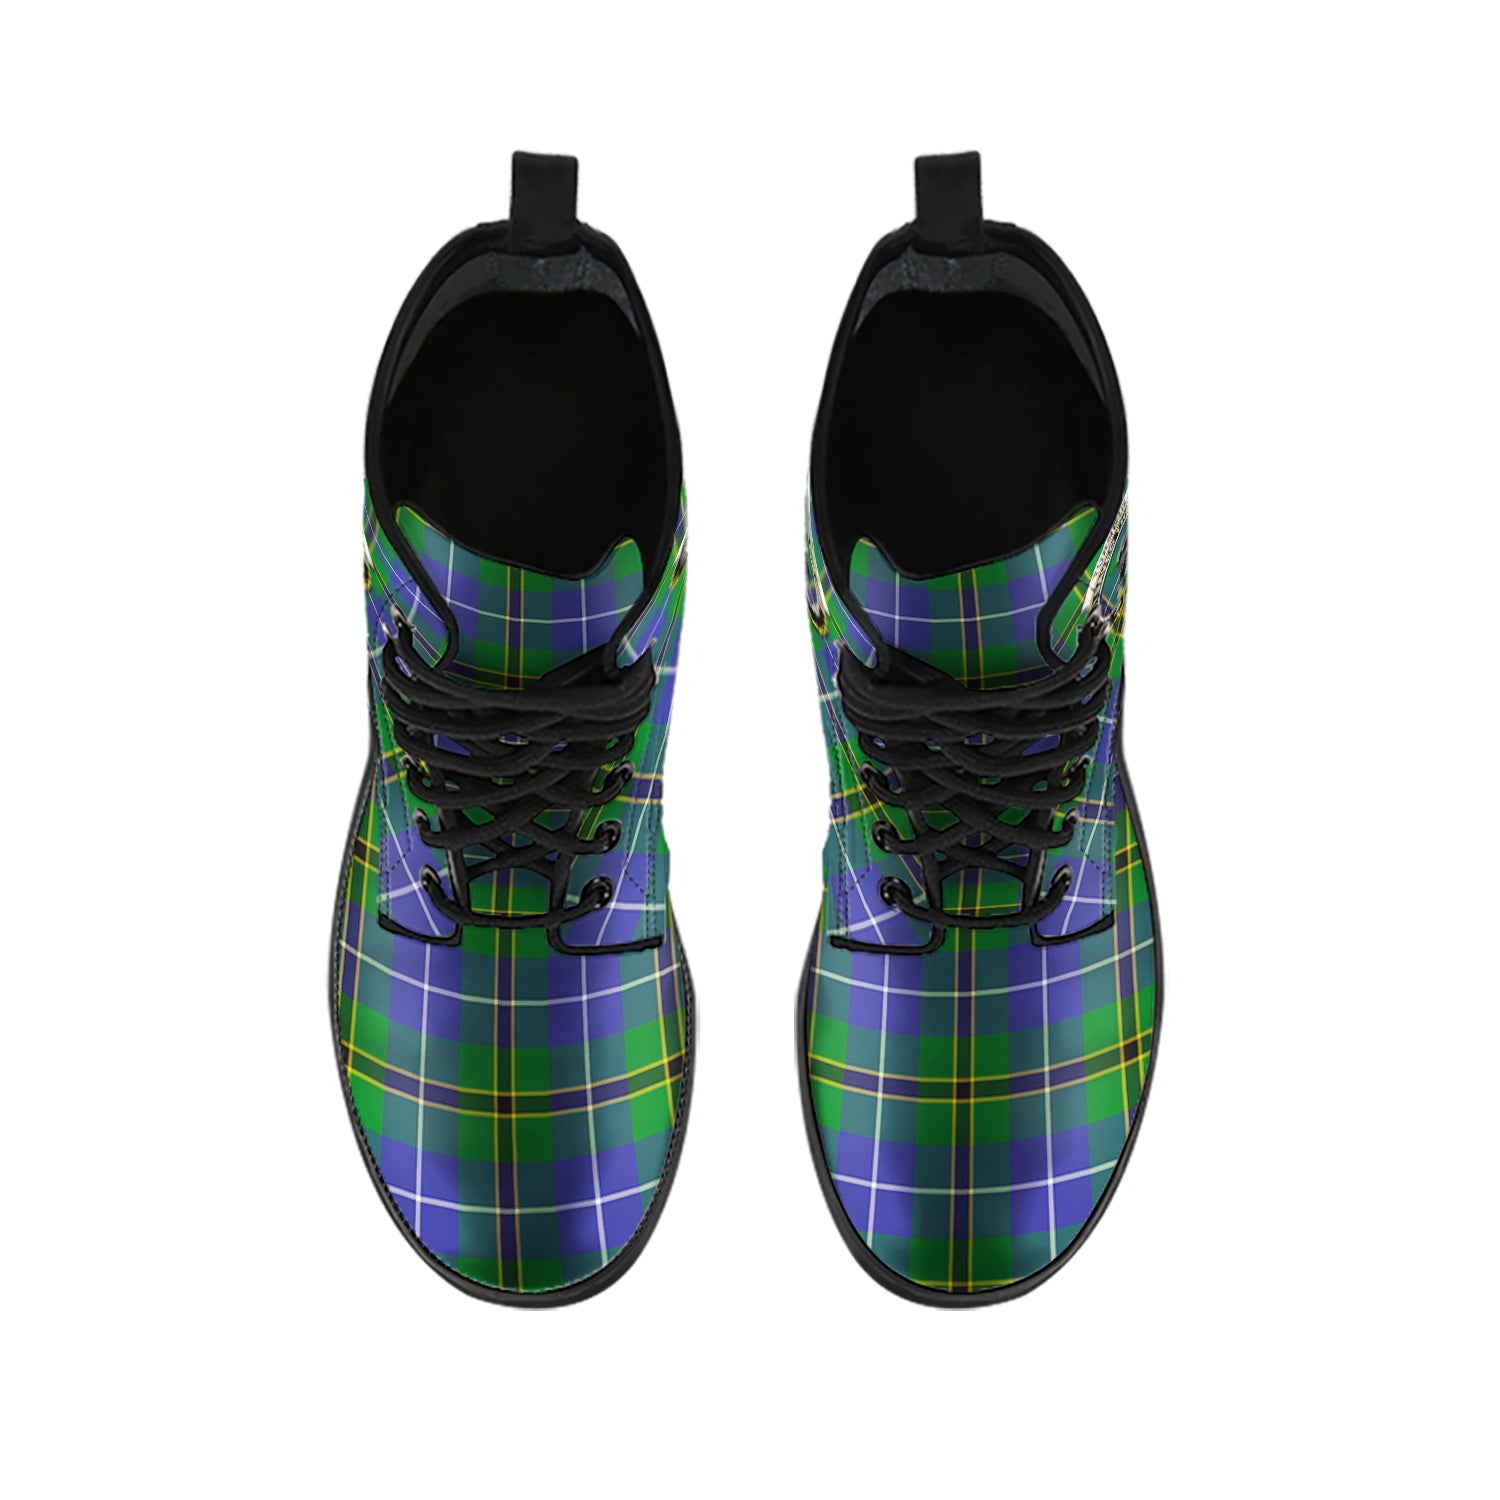 turnbull-hunting-tartan-leather-boots-with-family-crest